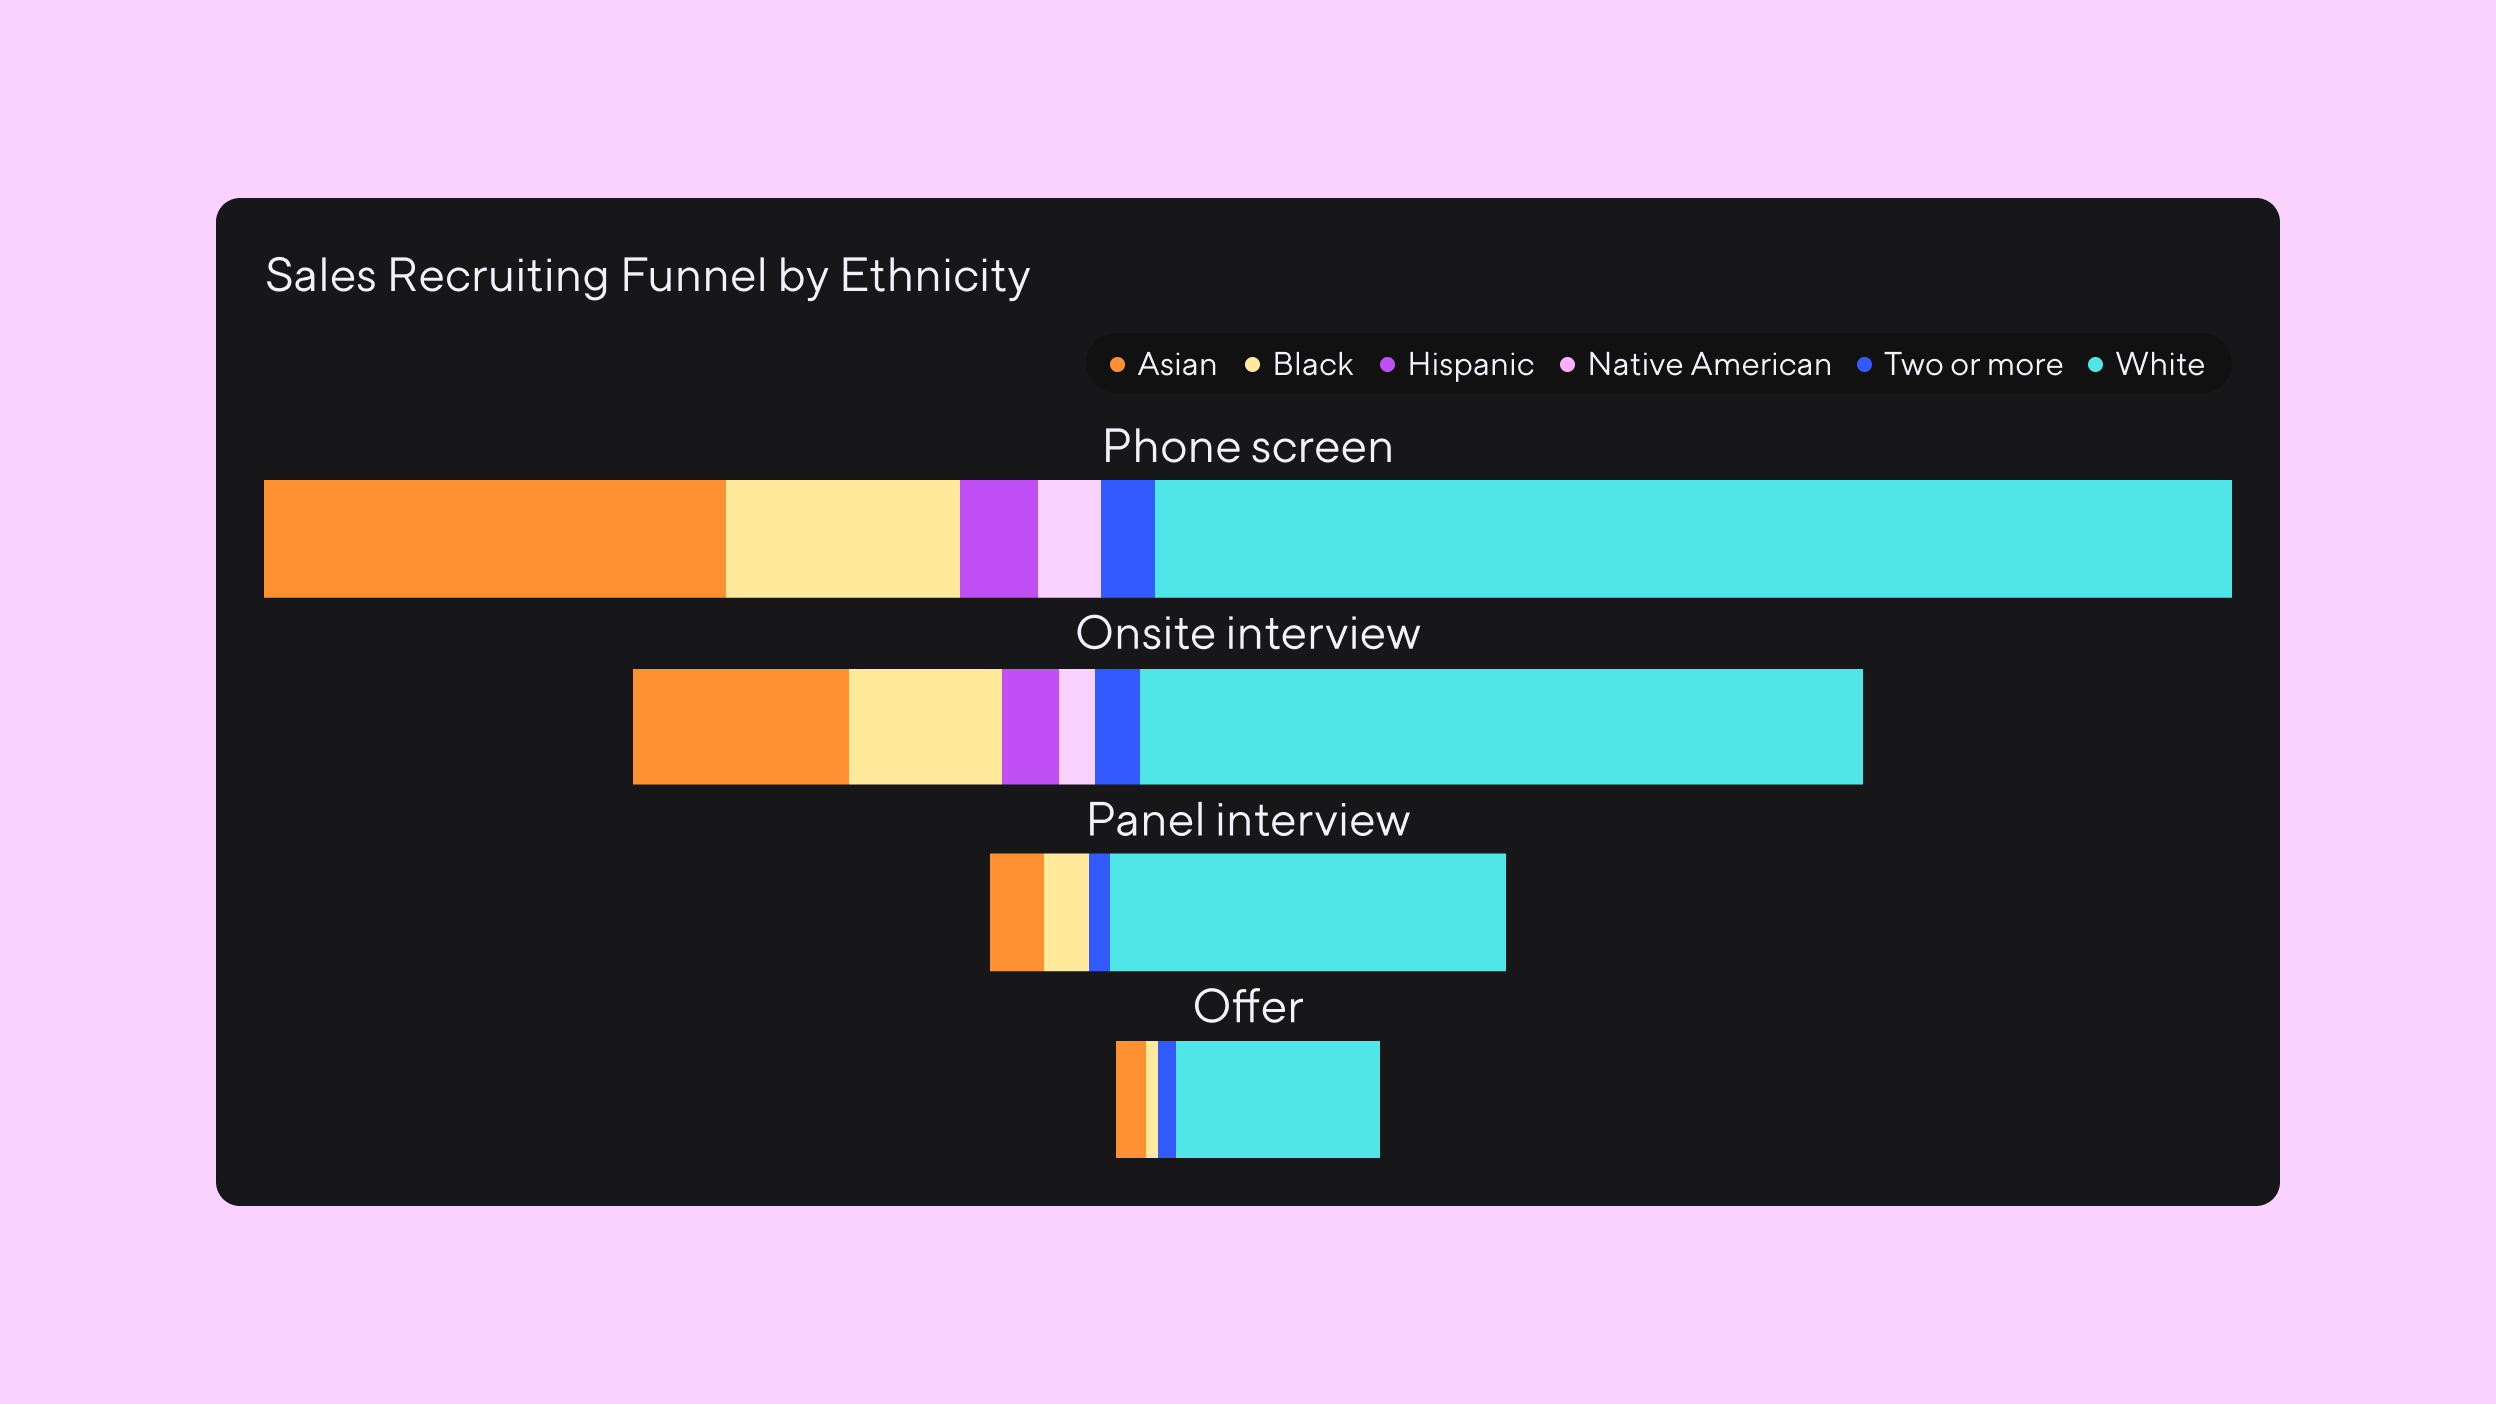 Horizontal stacked bar graph titled Sales Recruiting Funnel by Ethnicity showing breakdown of applicants to reach a phone screen, onsite interview, panel interview, and offer. The groups represented are Asian, in orange; Black, in yellow; Hispanic, in purple; Native American, in pink; two or more, in blue; and White, in teal.